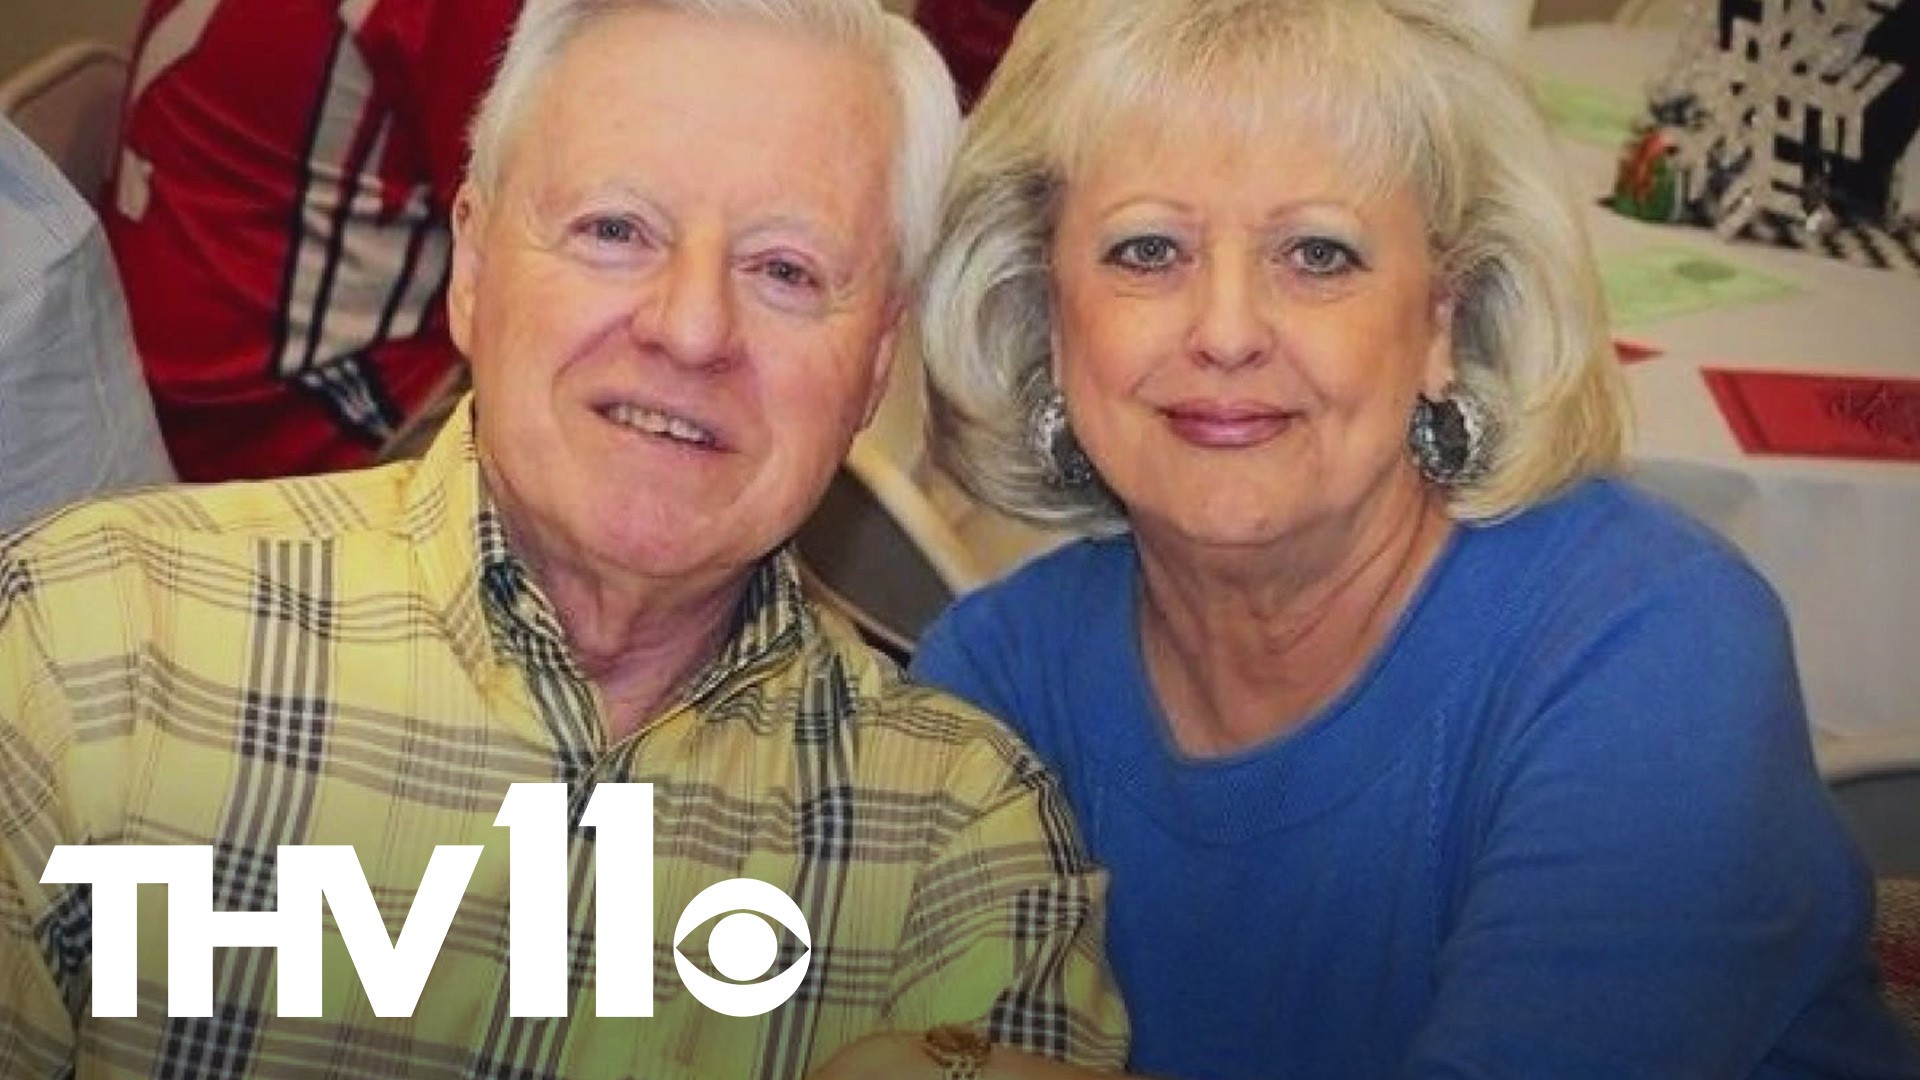 A congregation in Conway, Arkansas is hurting very much. Dozen of members are fighting COVID-19 and are mourning the pastor's wife death due to the virus.